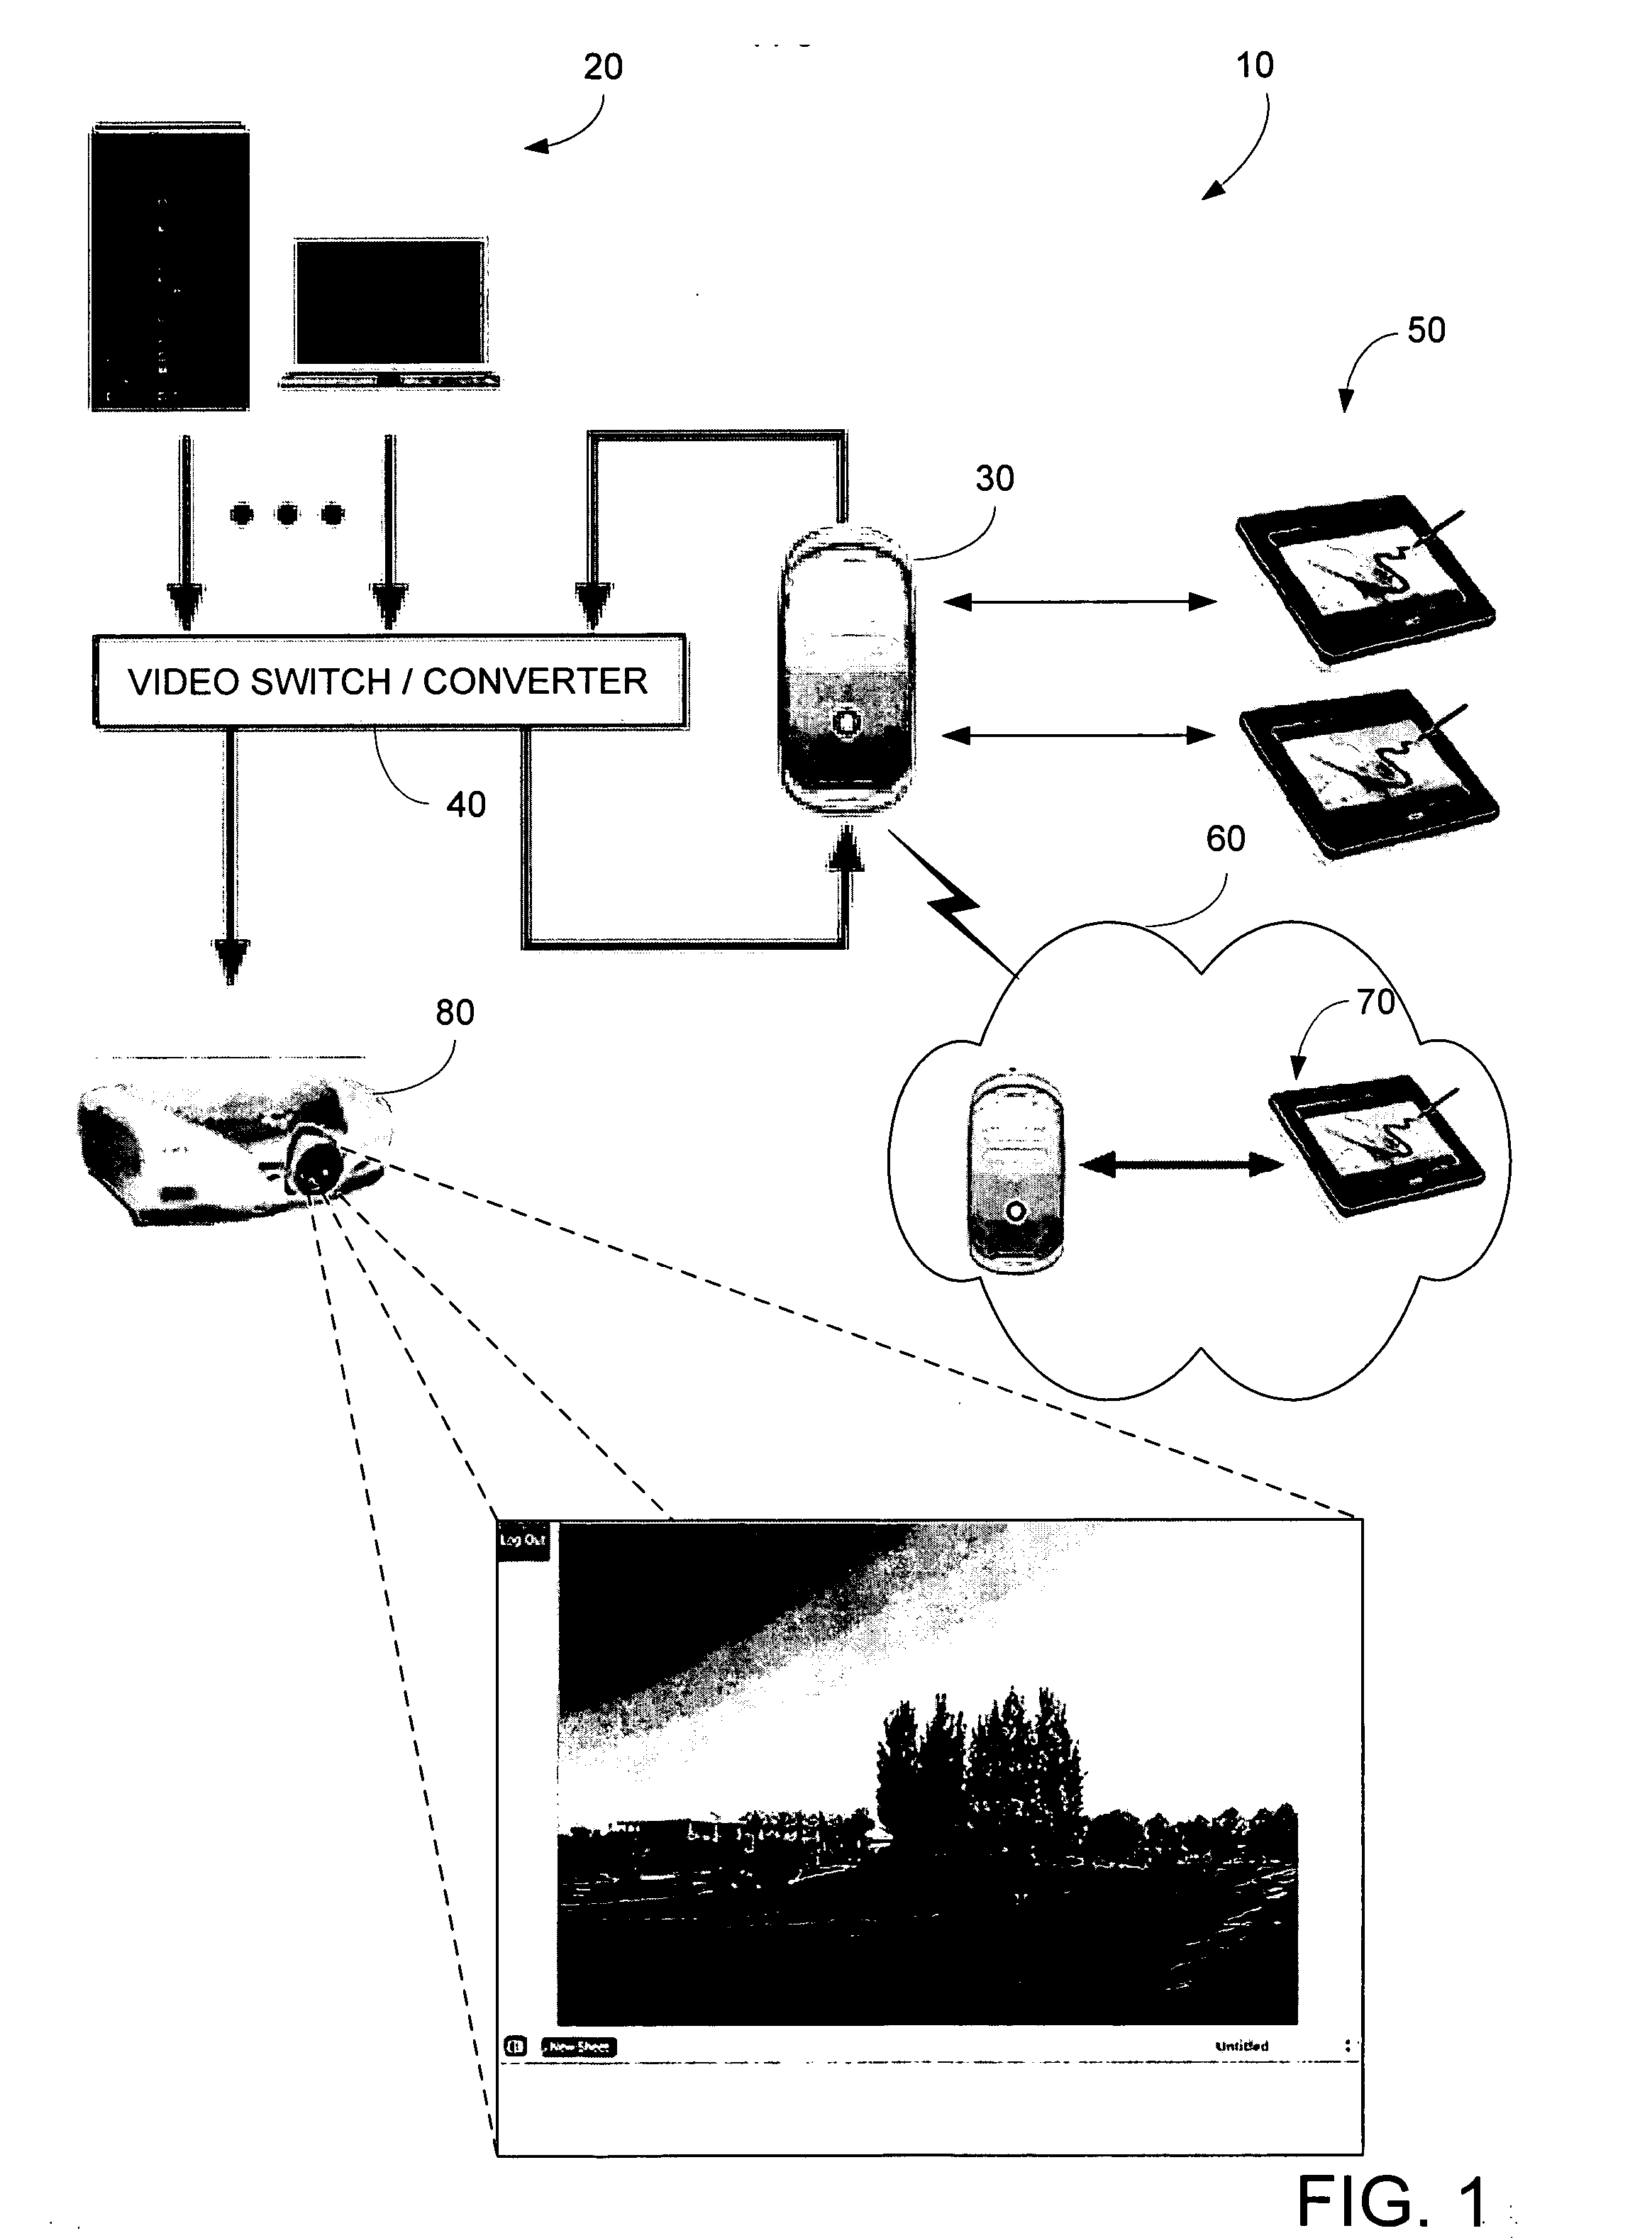 Animation review methods and apparatus